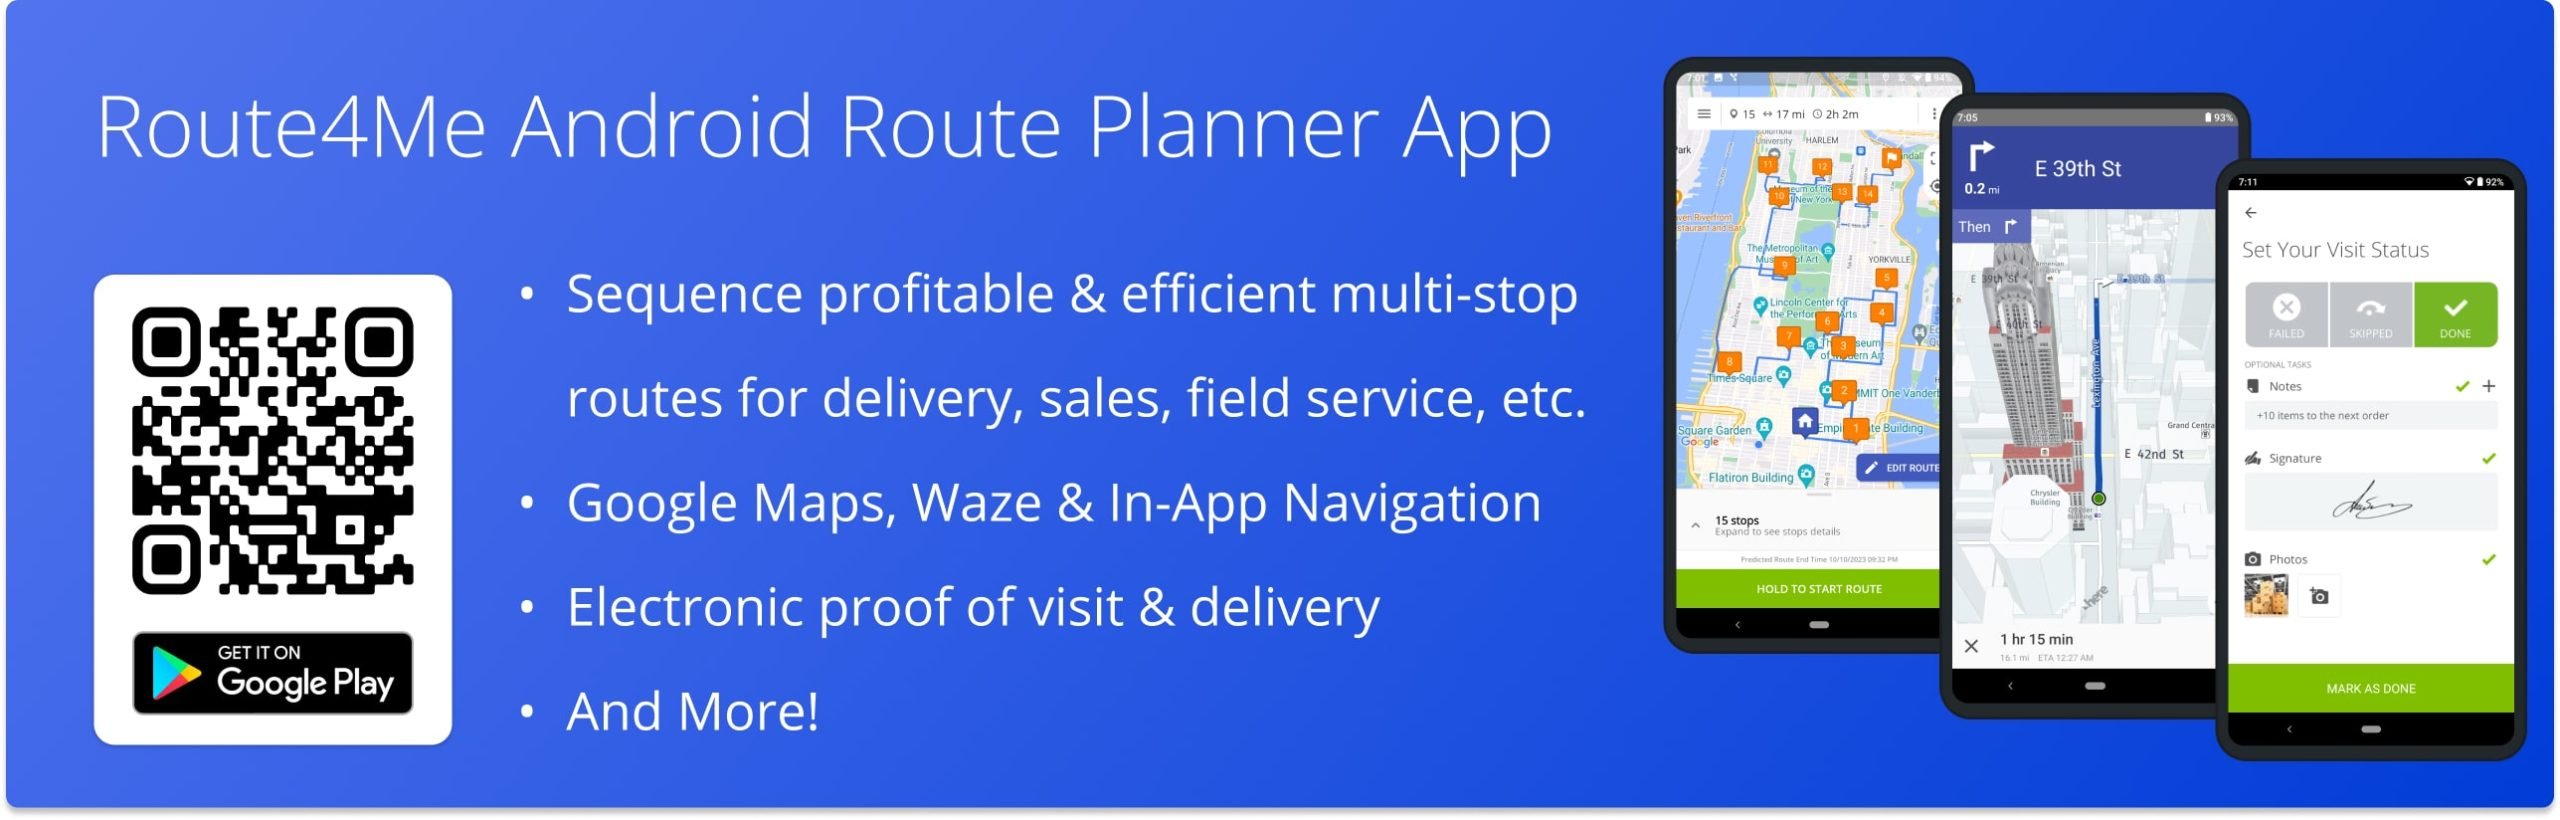 Download and start using Route4Me's Android Route Planner app to plan and sequence multi-stop routes, navigate and complete routes, collect proof of visit, and more.